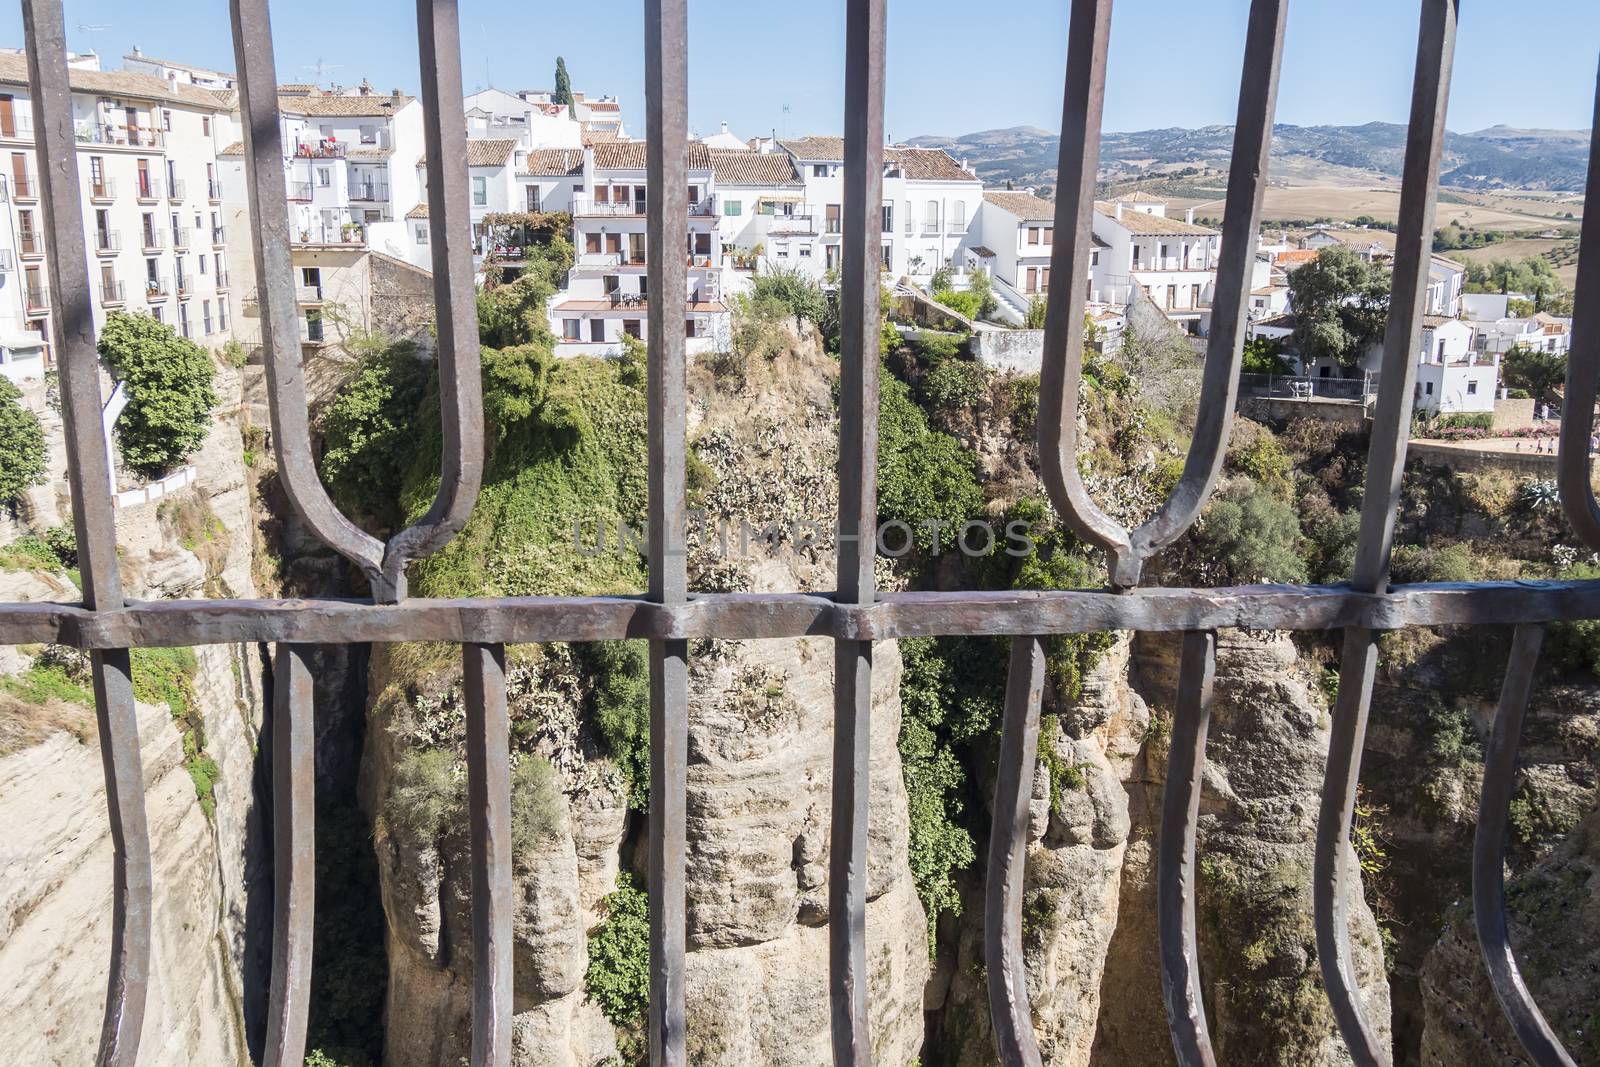 View from the new Bridge over Guadalevin River in Ronda, Malaga, Spain. Popular landmark in the evening